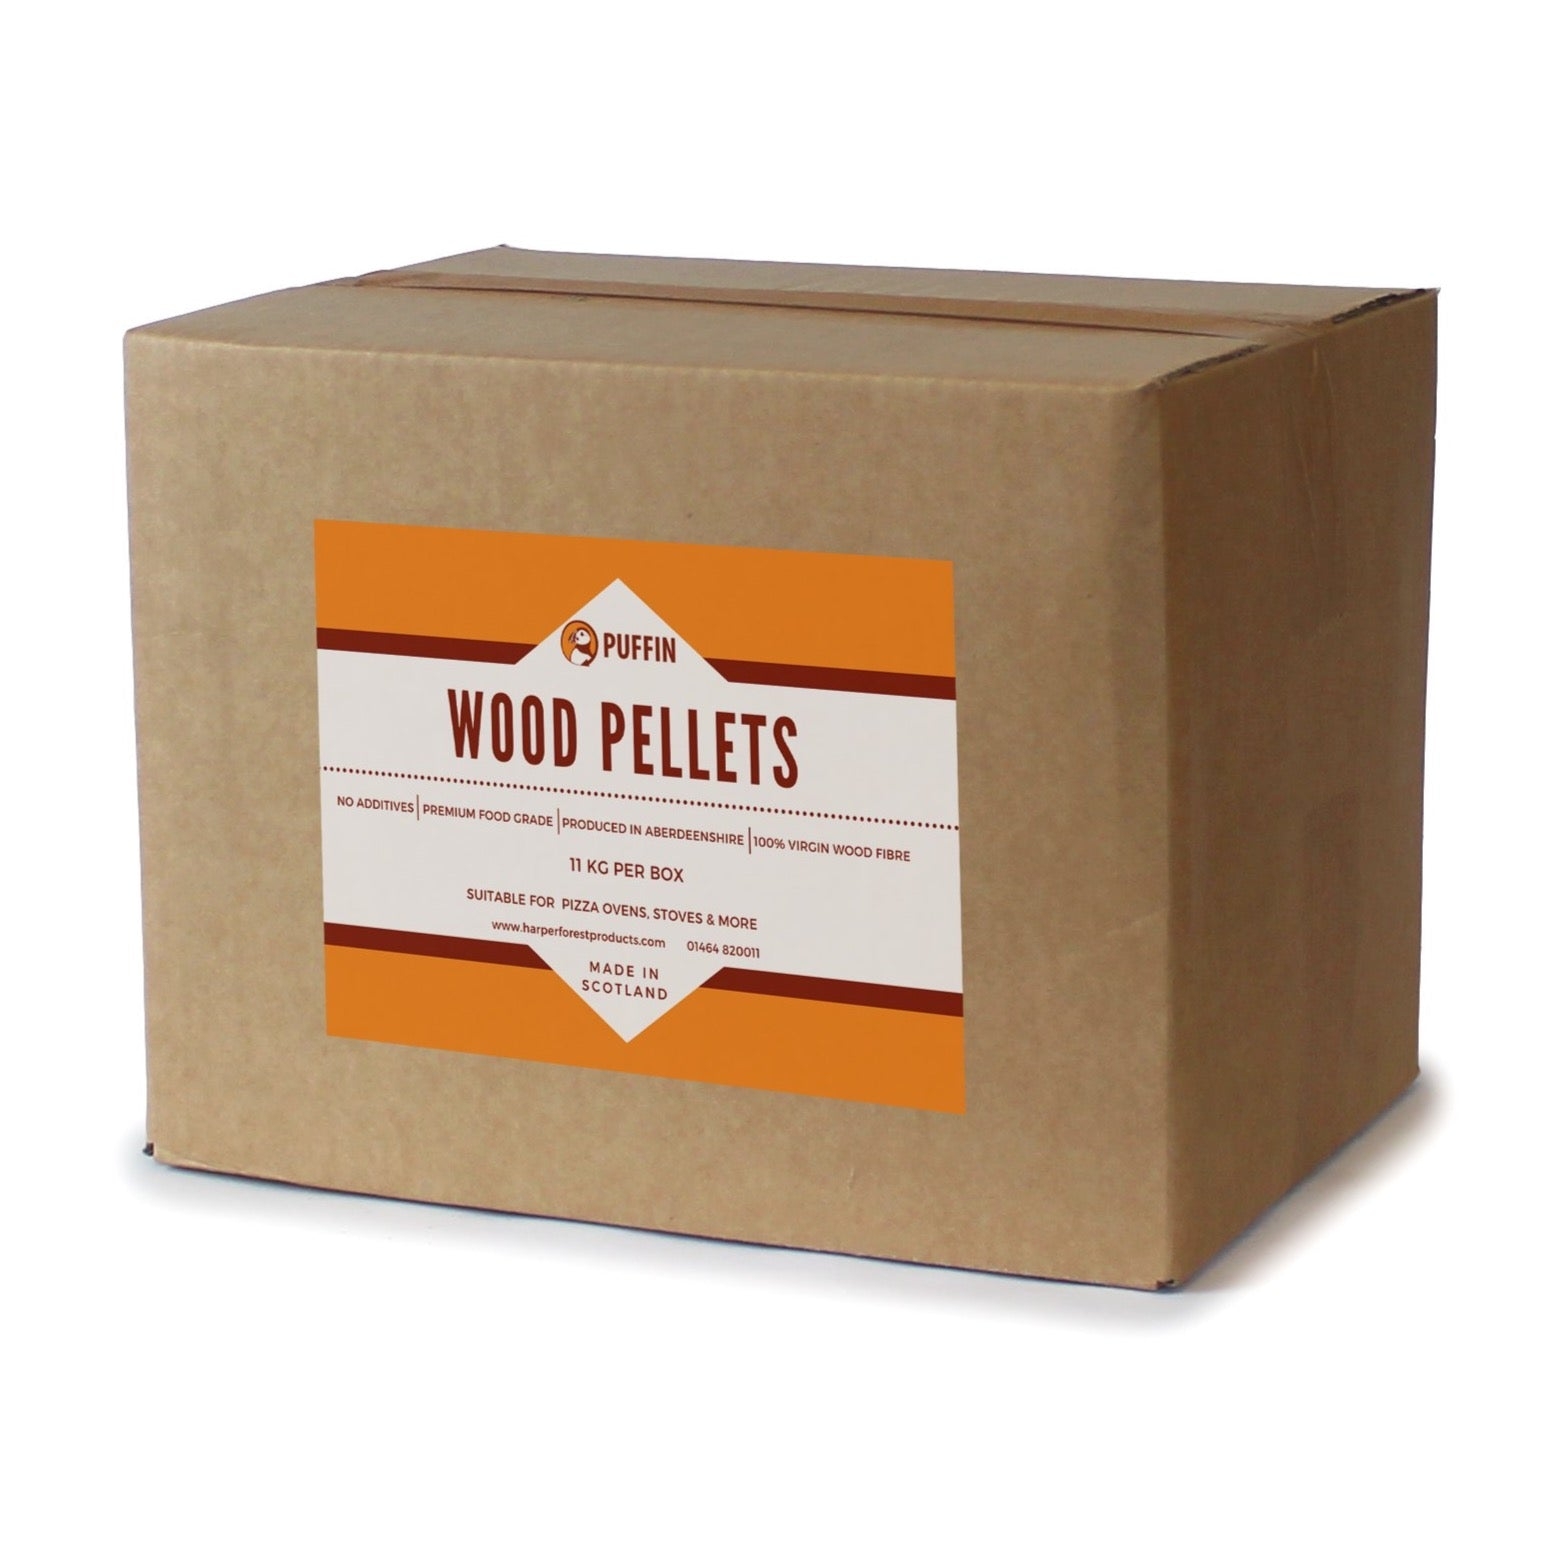 Wood Pellets for Pizza Oven’s & Stoves – Puffin Wood Fuels